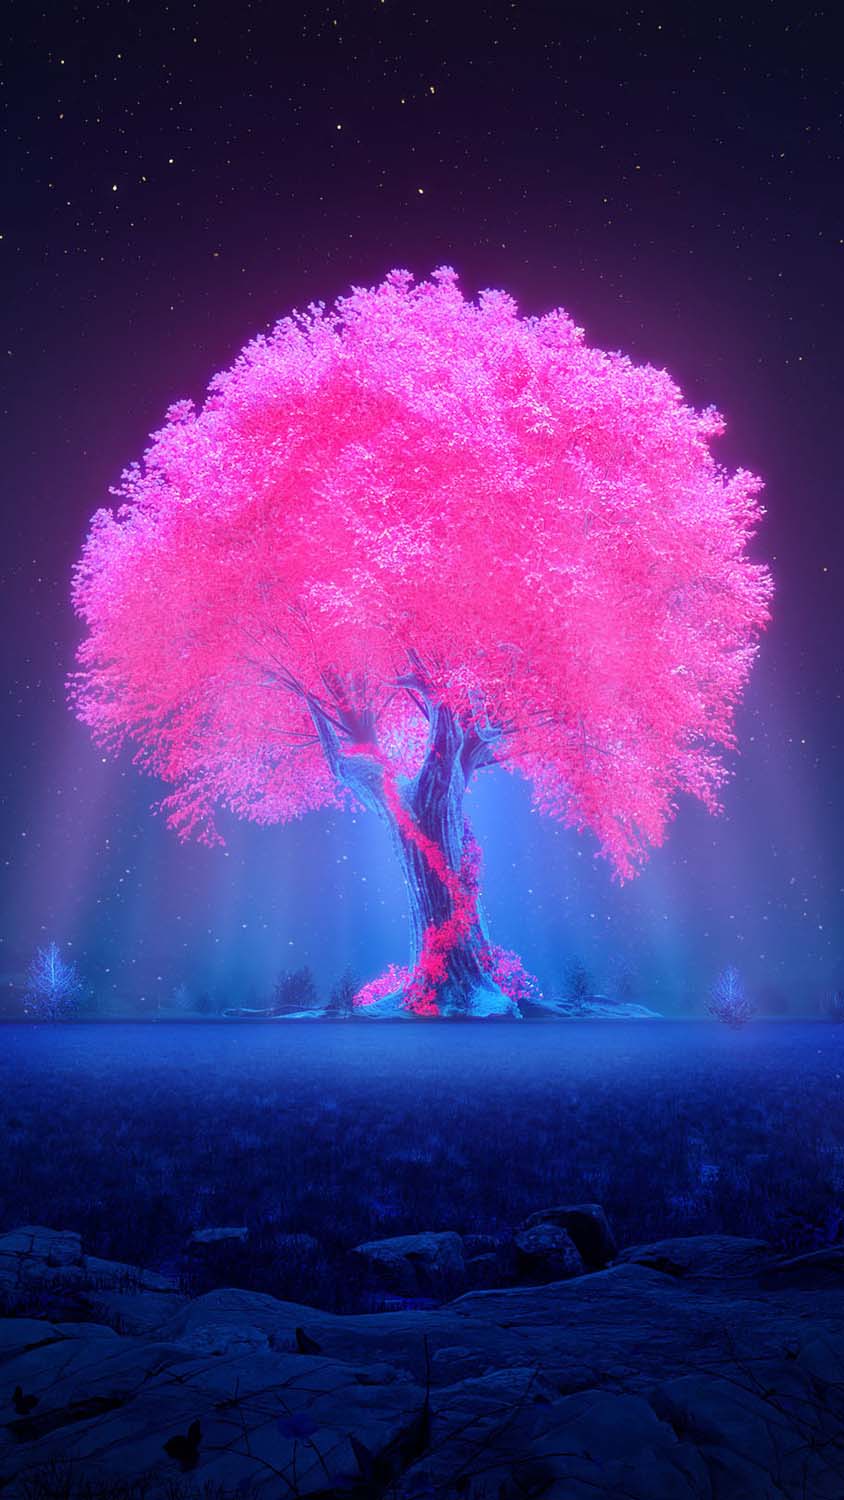 The Tree Of Life IPhone Wallpaper HD - IPhone Wallpapers : iPhone Wallpapers